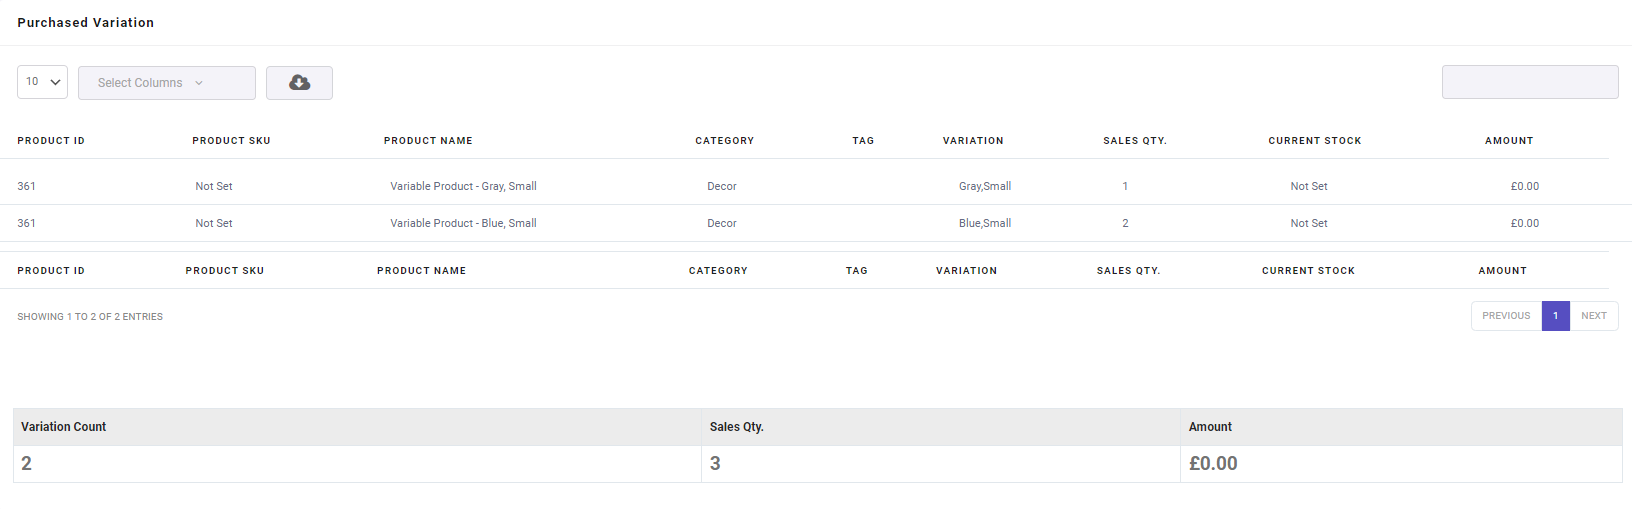 WooCommerce purchased specific variation result